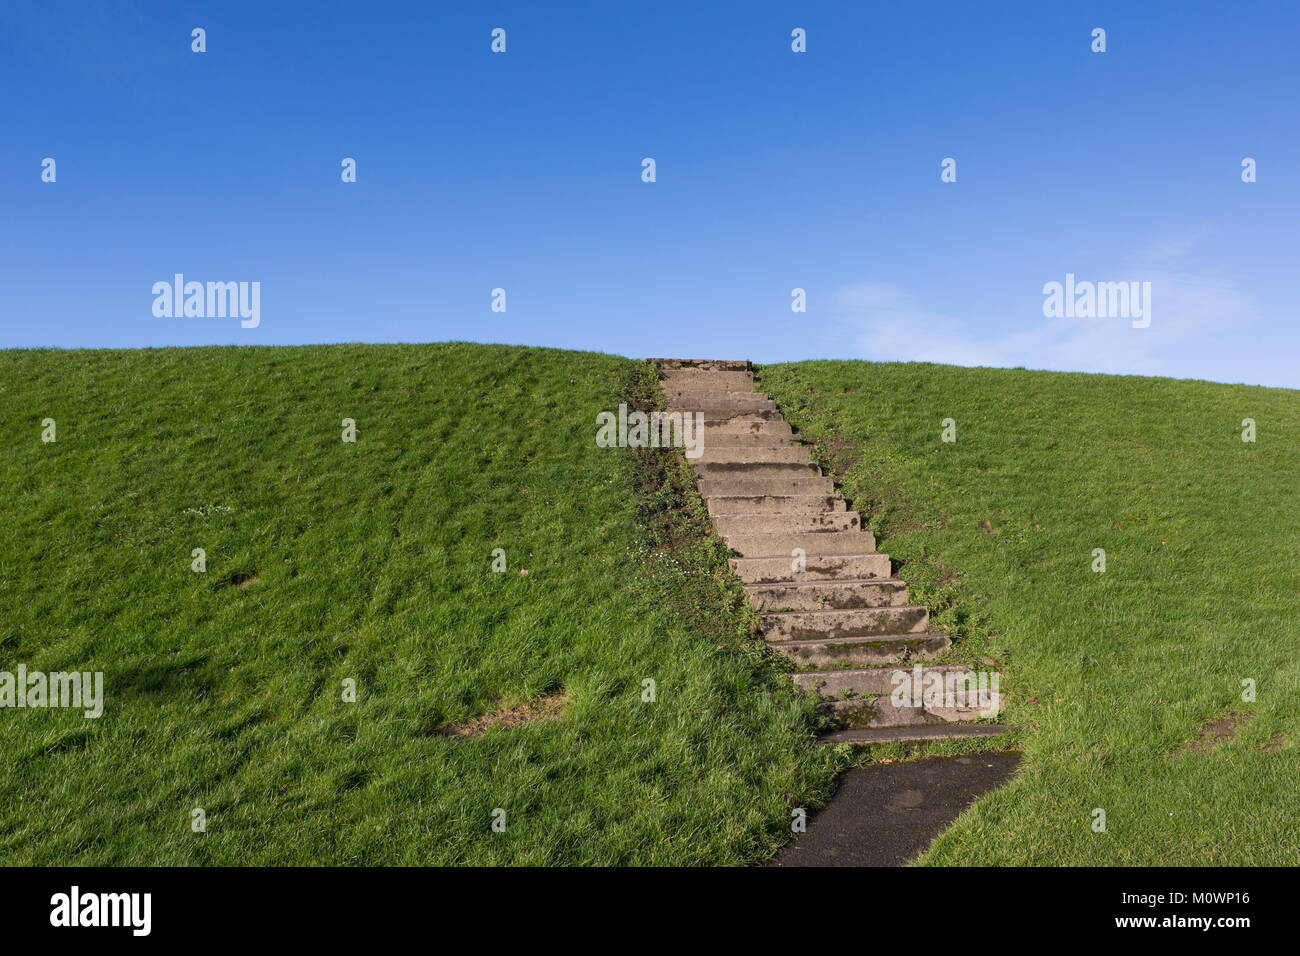 Stone steps through green grass heading up to blue sky Stock Photo